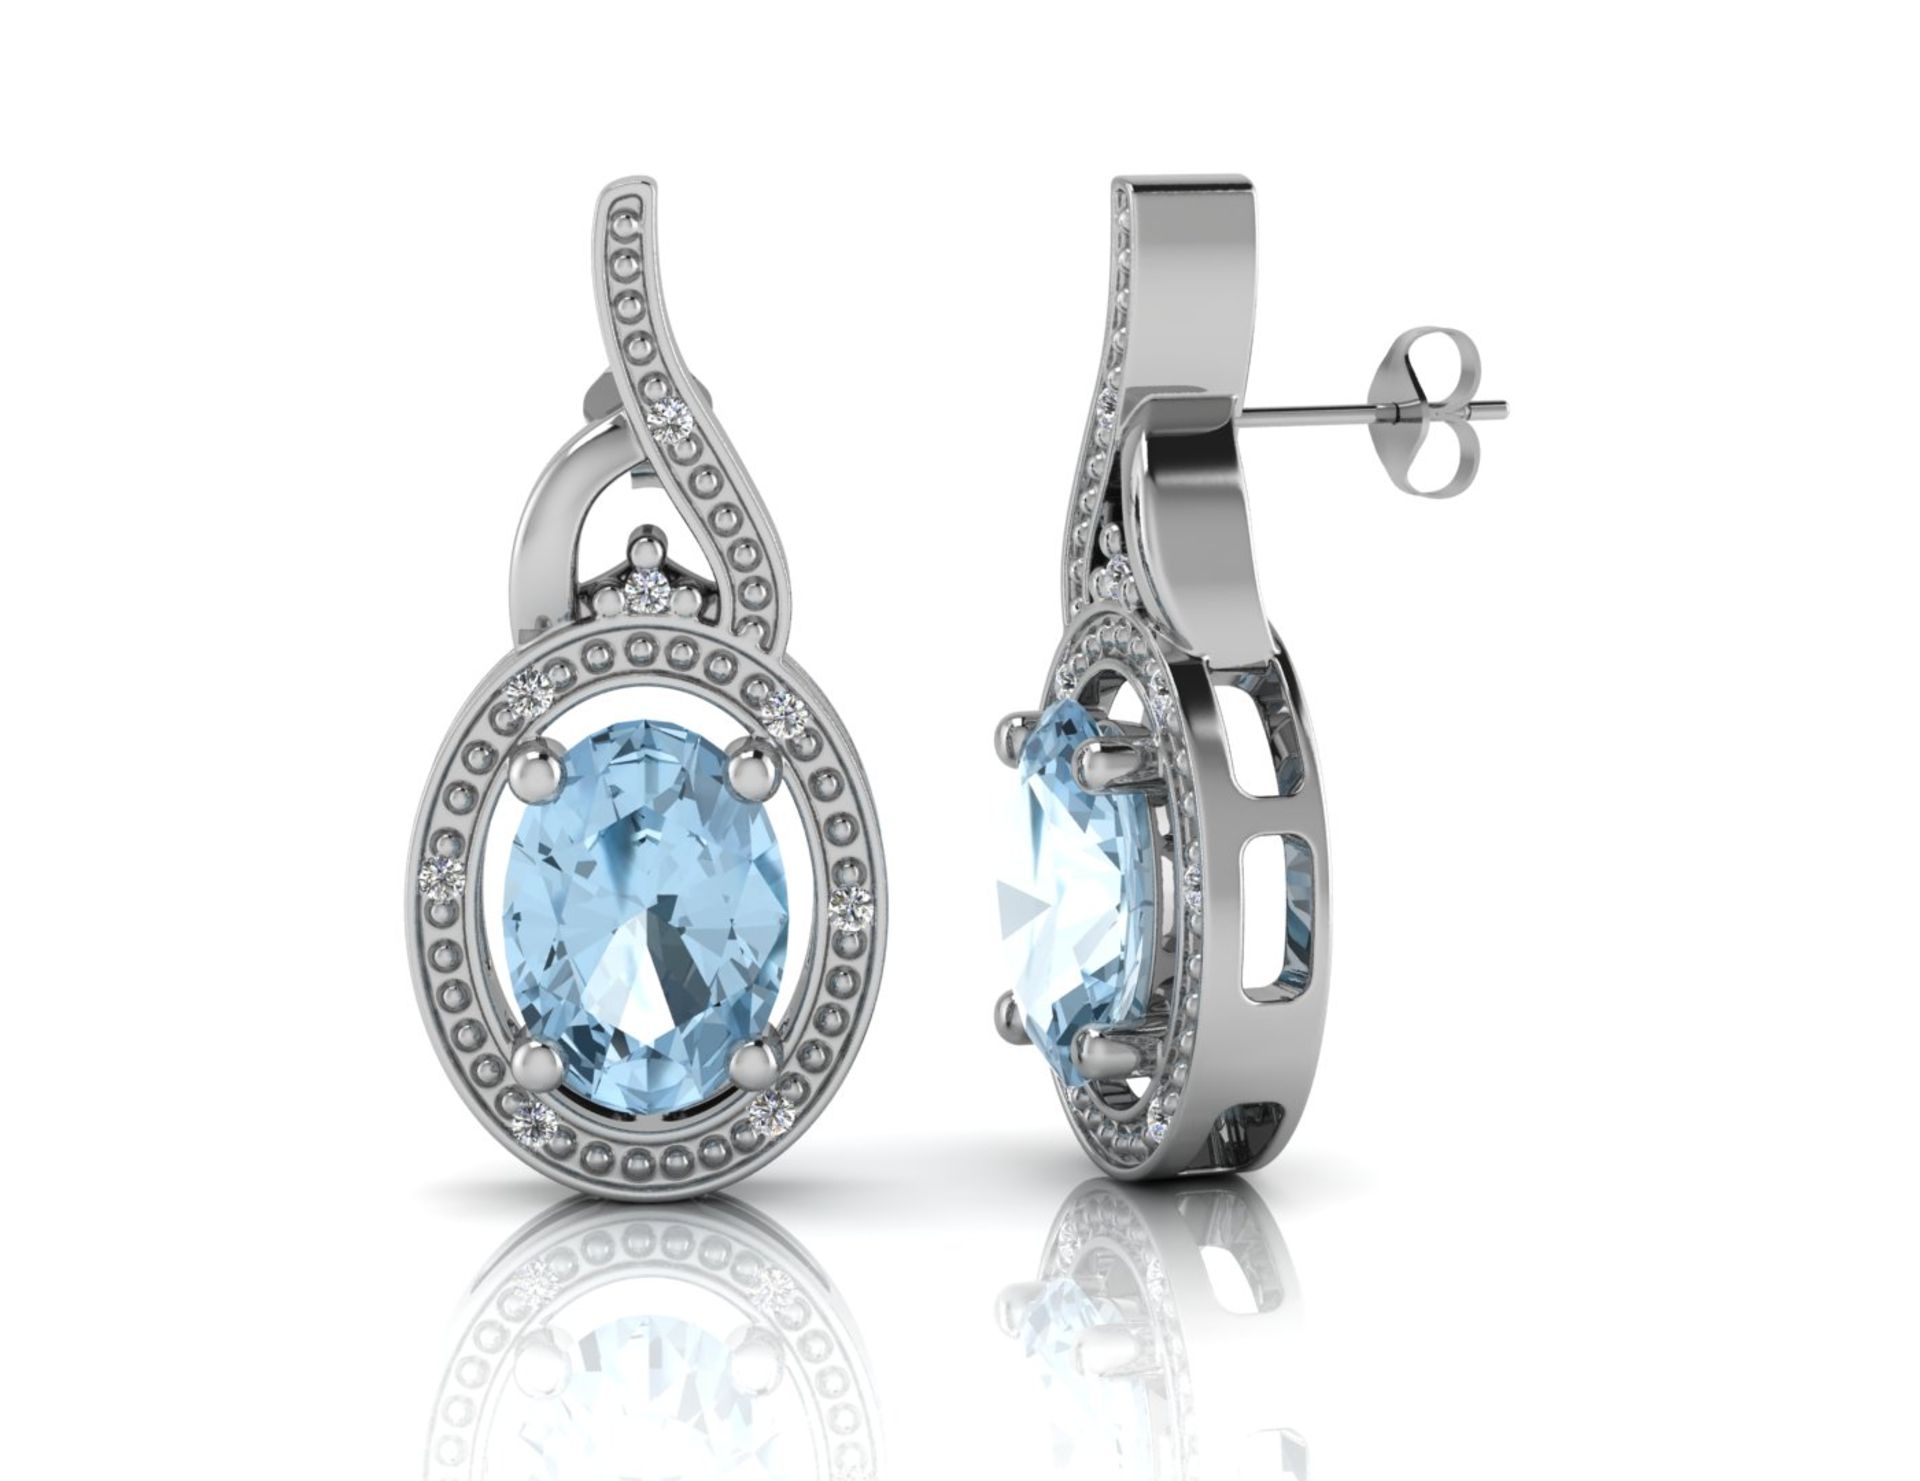 UNUSED - Certified by GIE 9ct White Gold Diamond And Blue Topaz Earring 0.05 Carats, Colour-D,